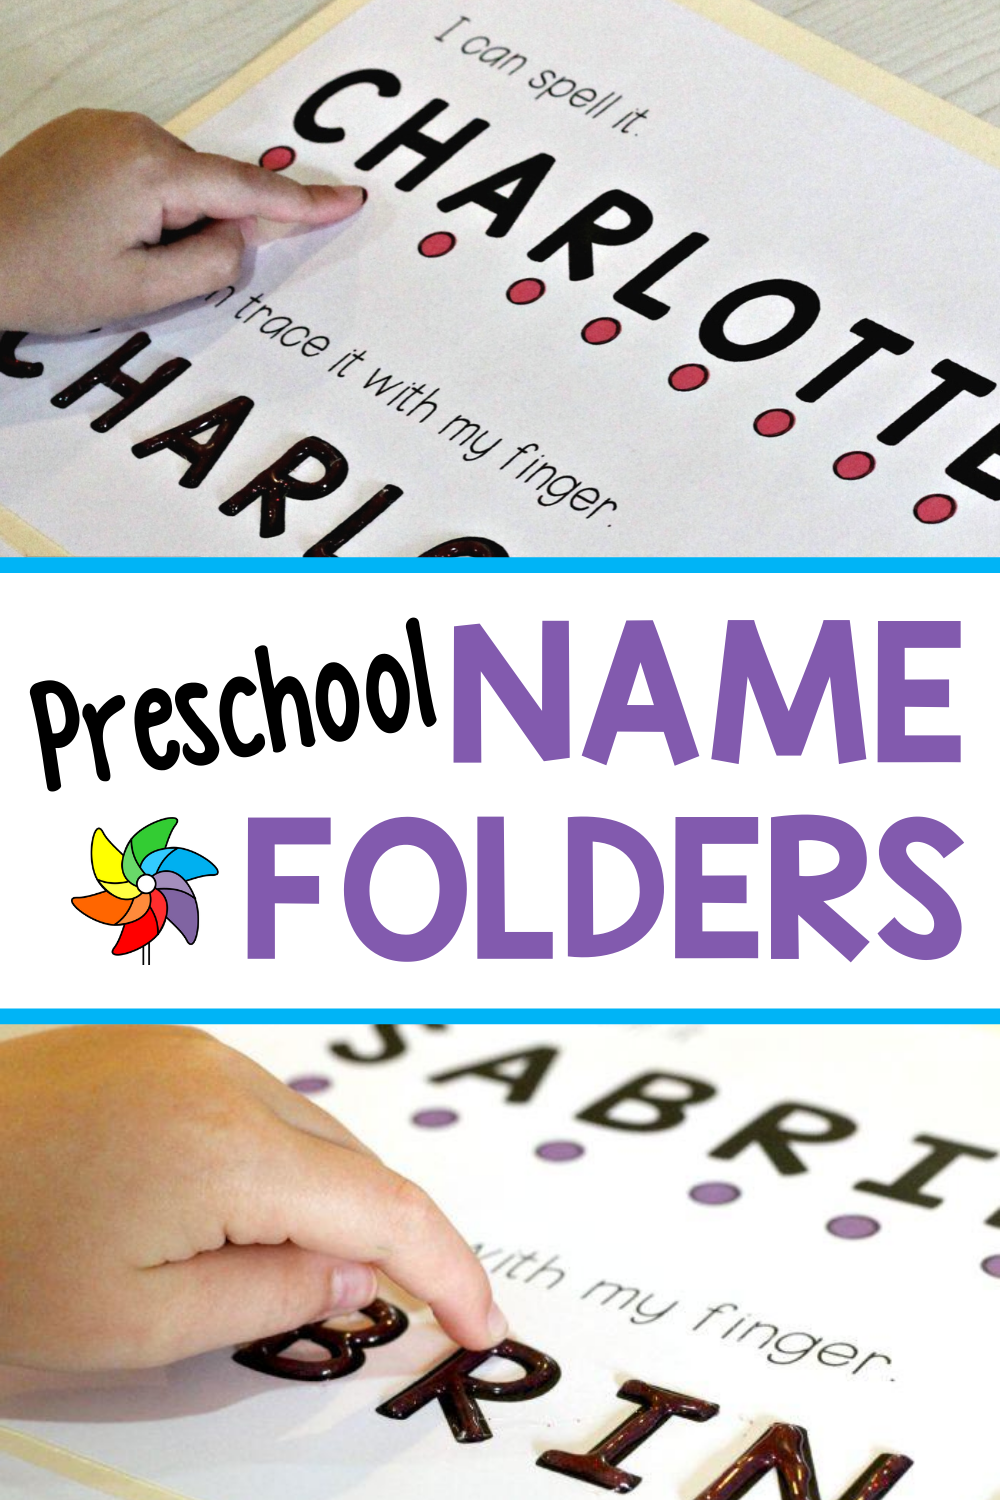 300+ Best Literacy: Name Games - Preschool Images In 2020 throughout Name Tracing Charlotte